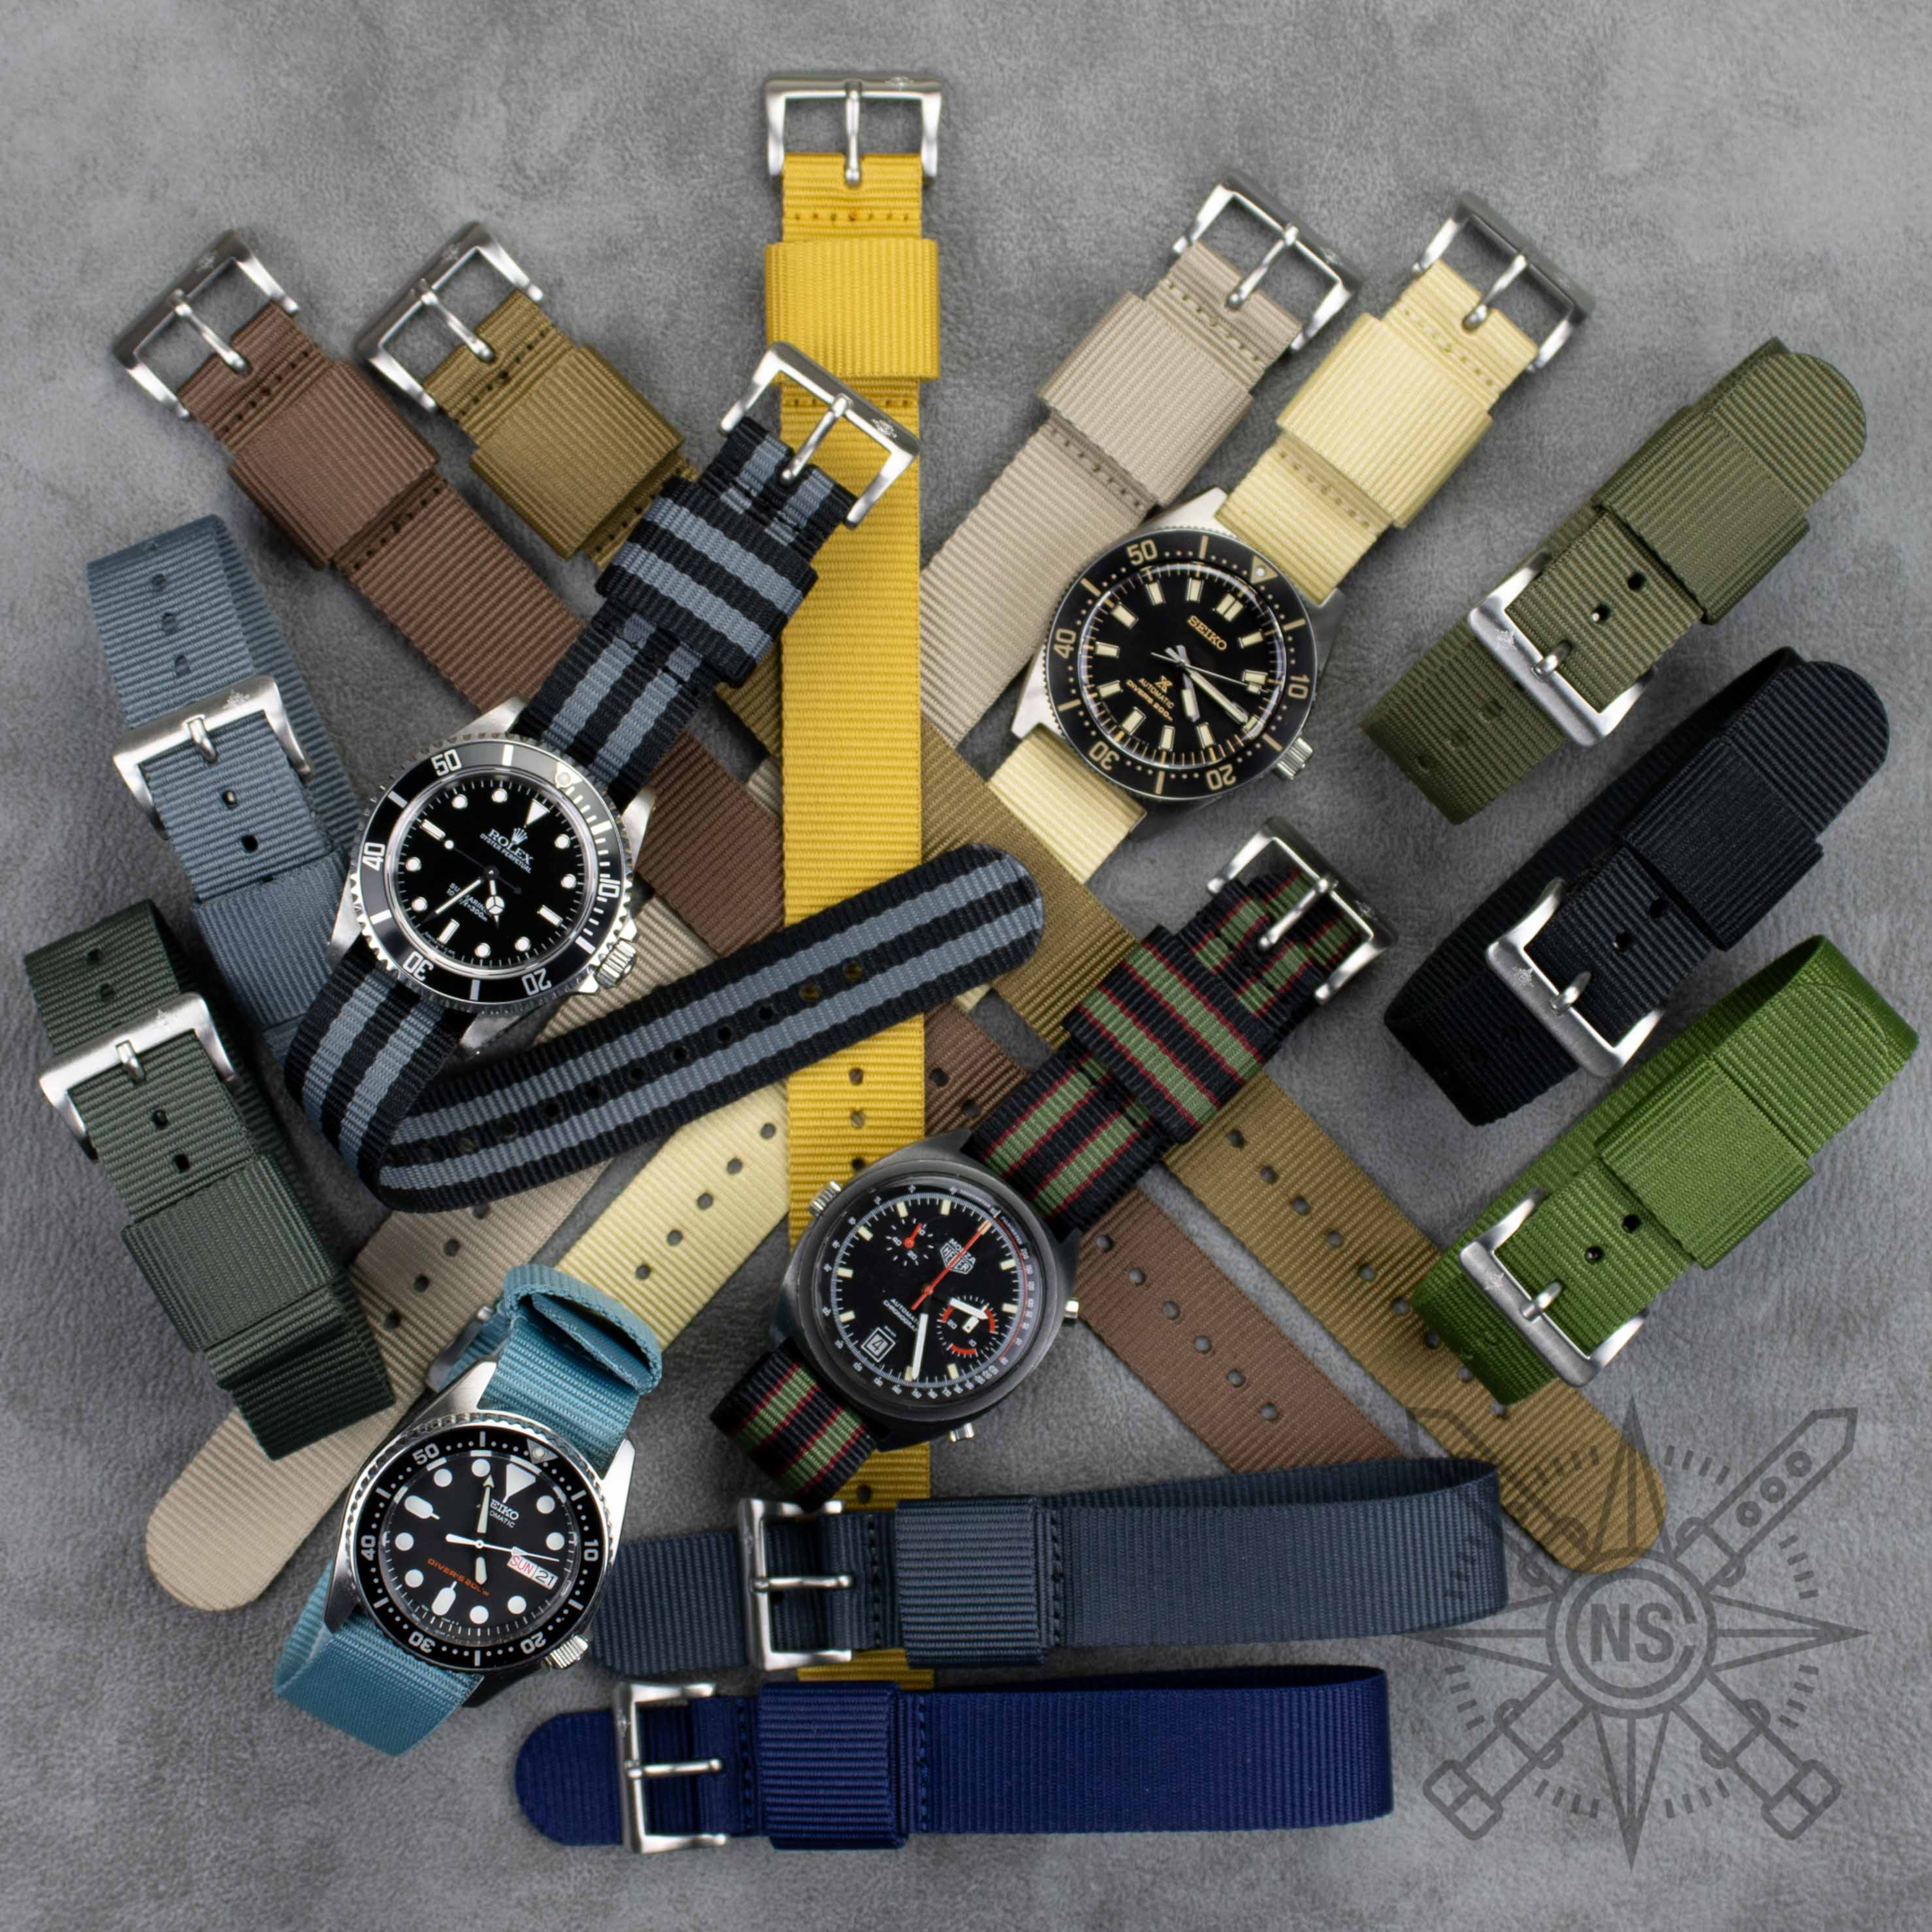 Variety of colorful RAF watch straps